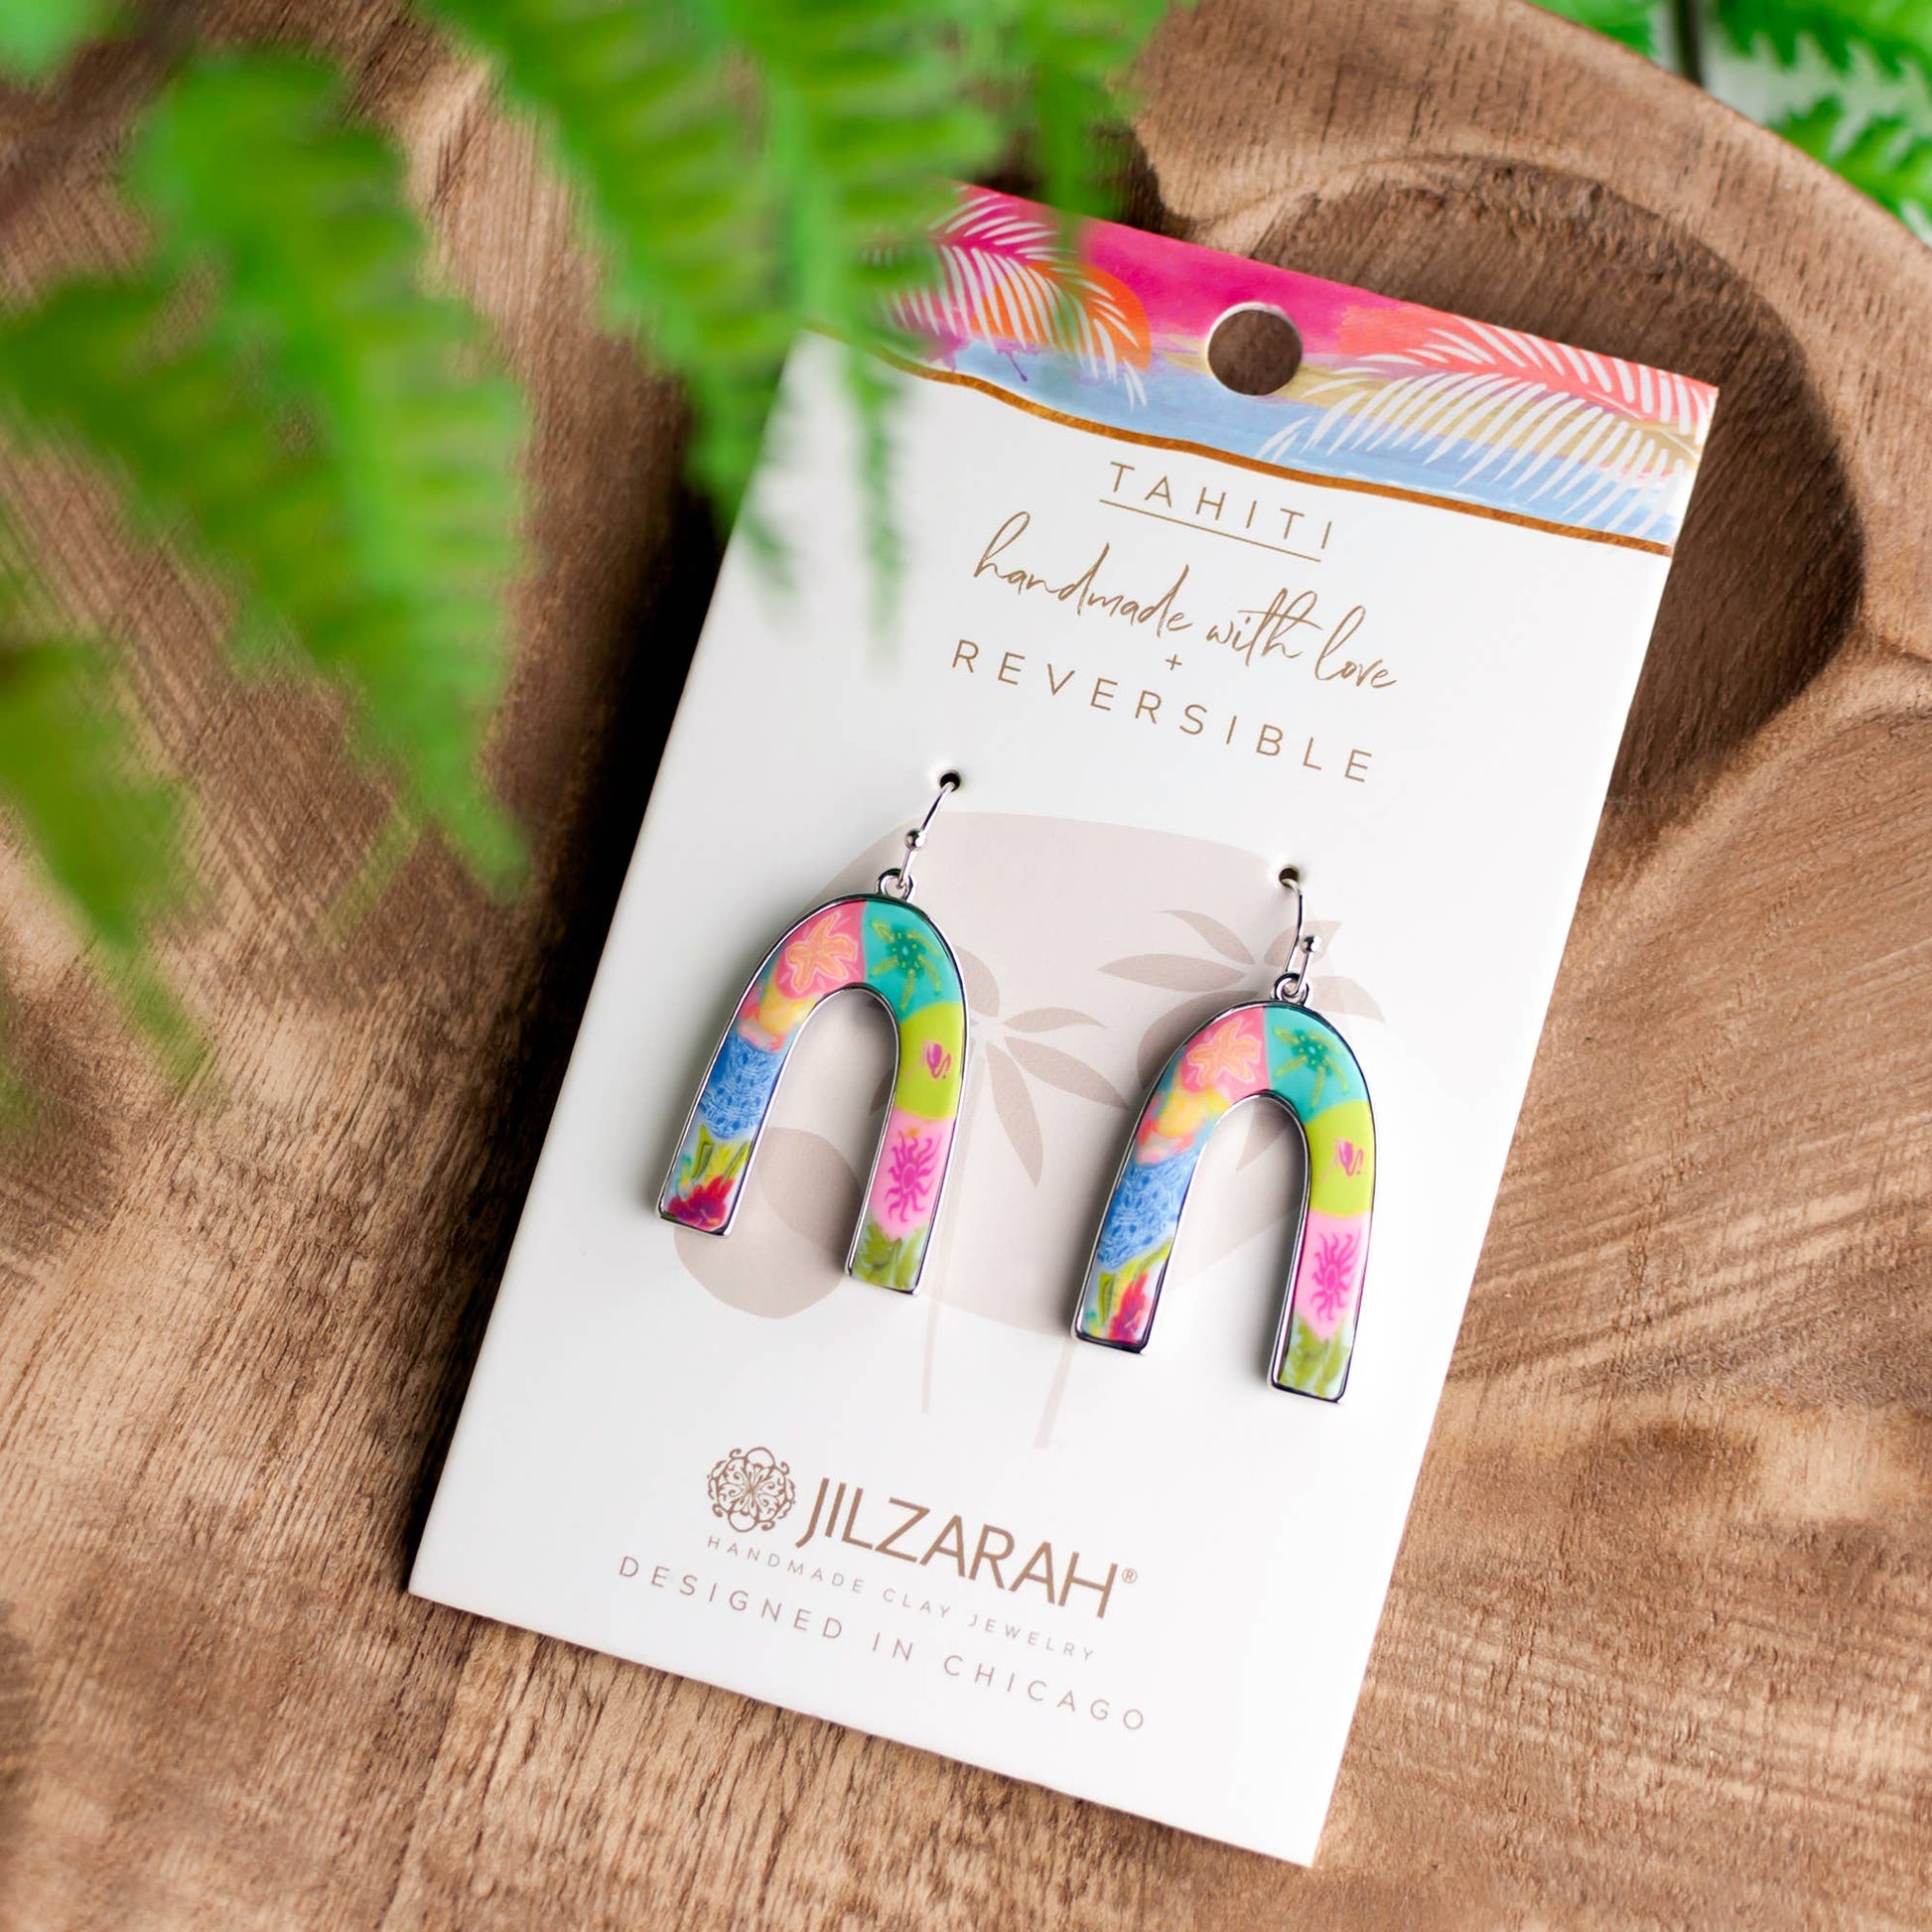 Tahiti Reversible Arc Earrings - With shapes and colors inspired by tropical beaches and rainbows, let these reversible arc earrings take you to the shores of Tahiti!